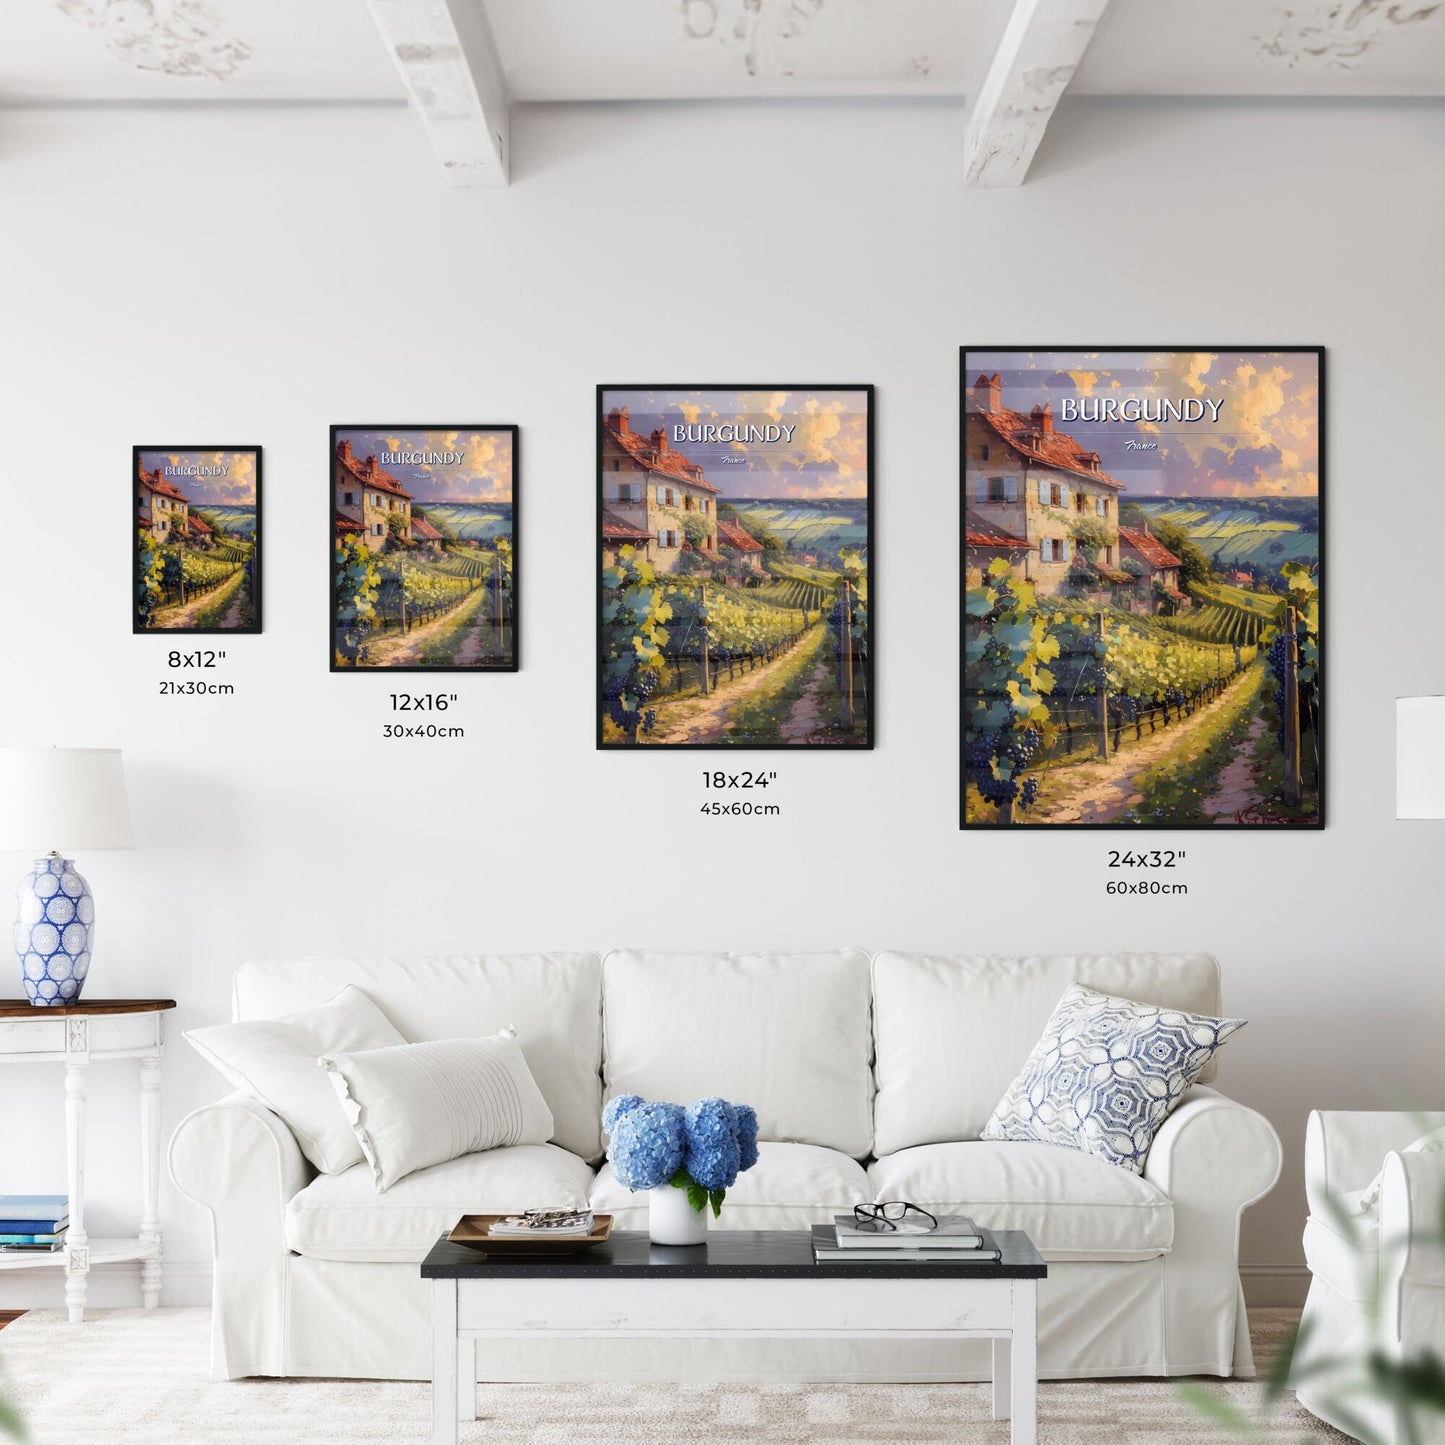 Burgundy, France - Art print of a painting of a house with a vineyard Default Title